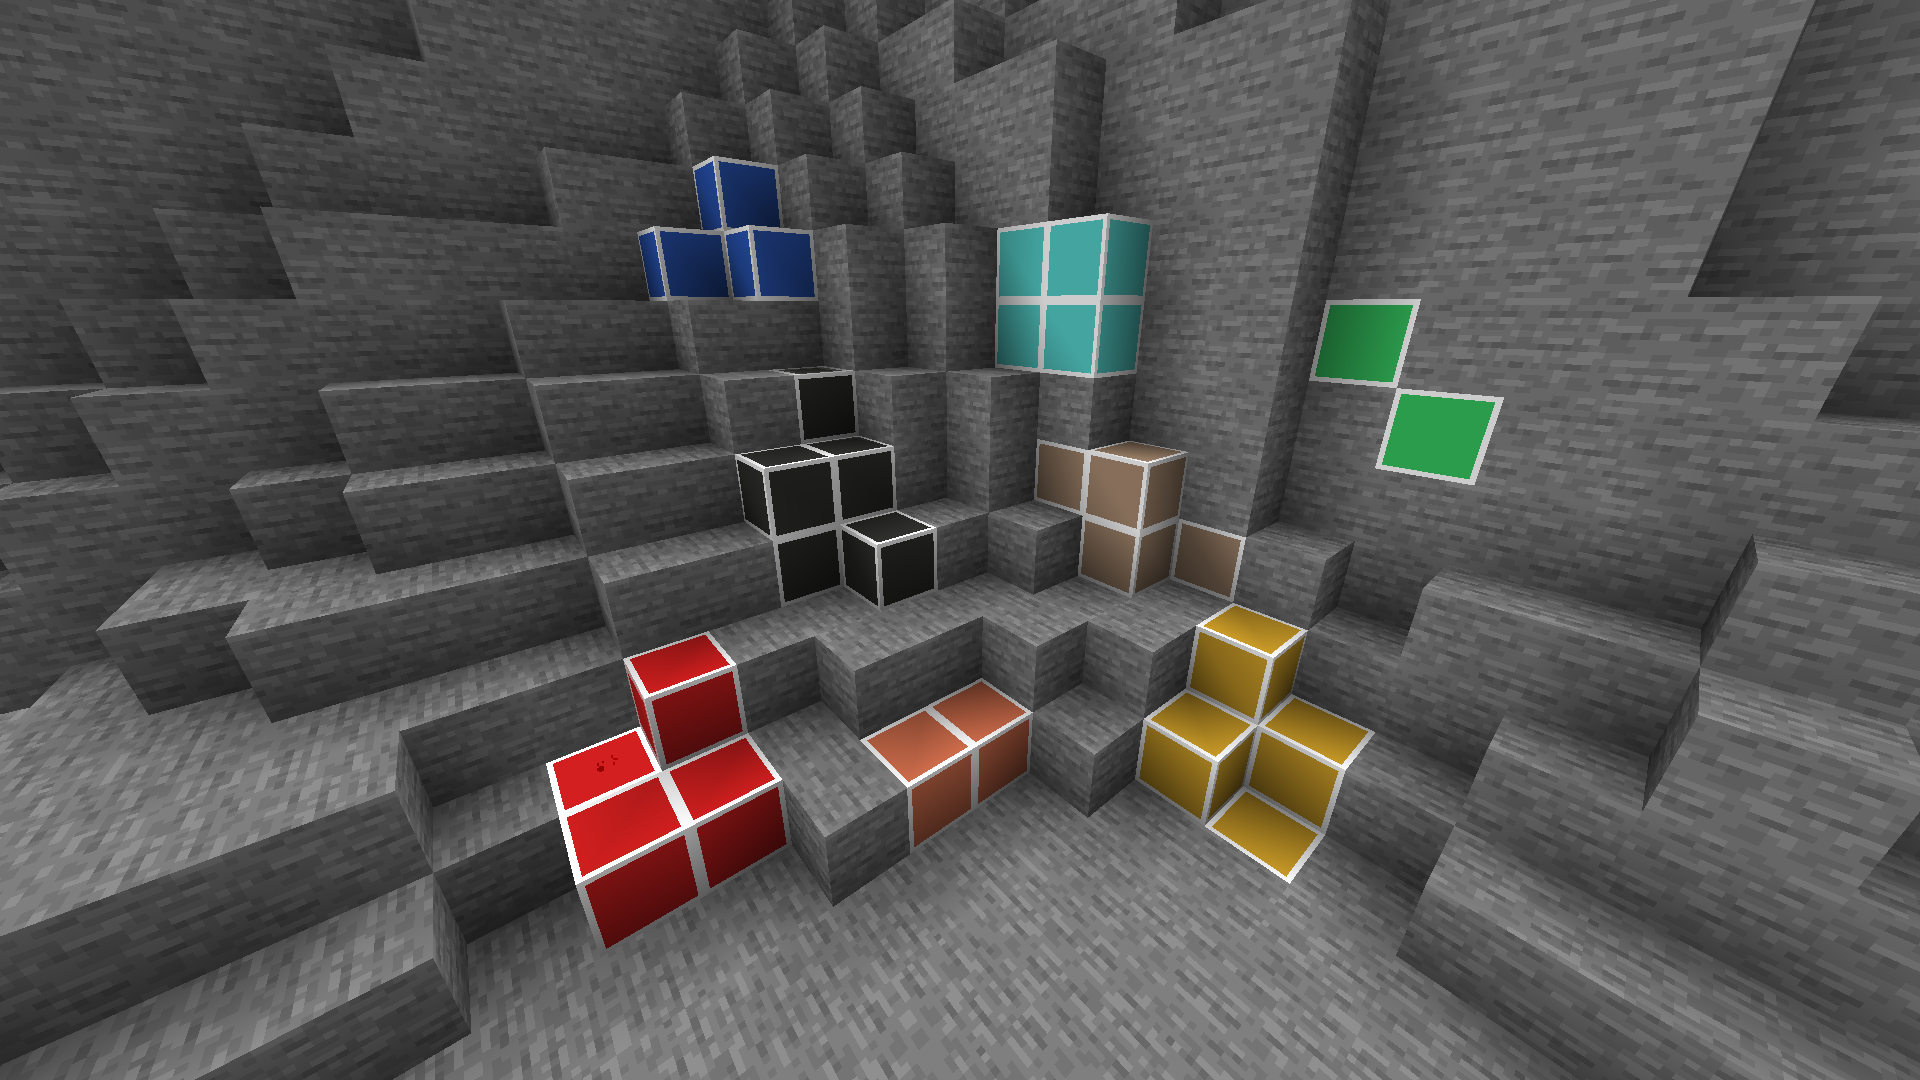 What the overworld ores look like